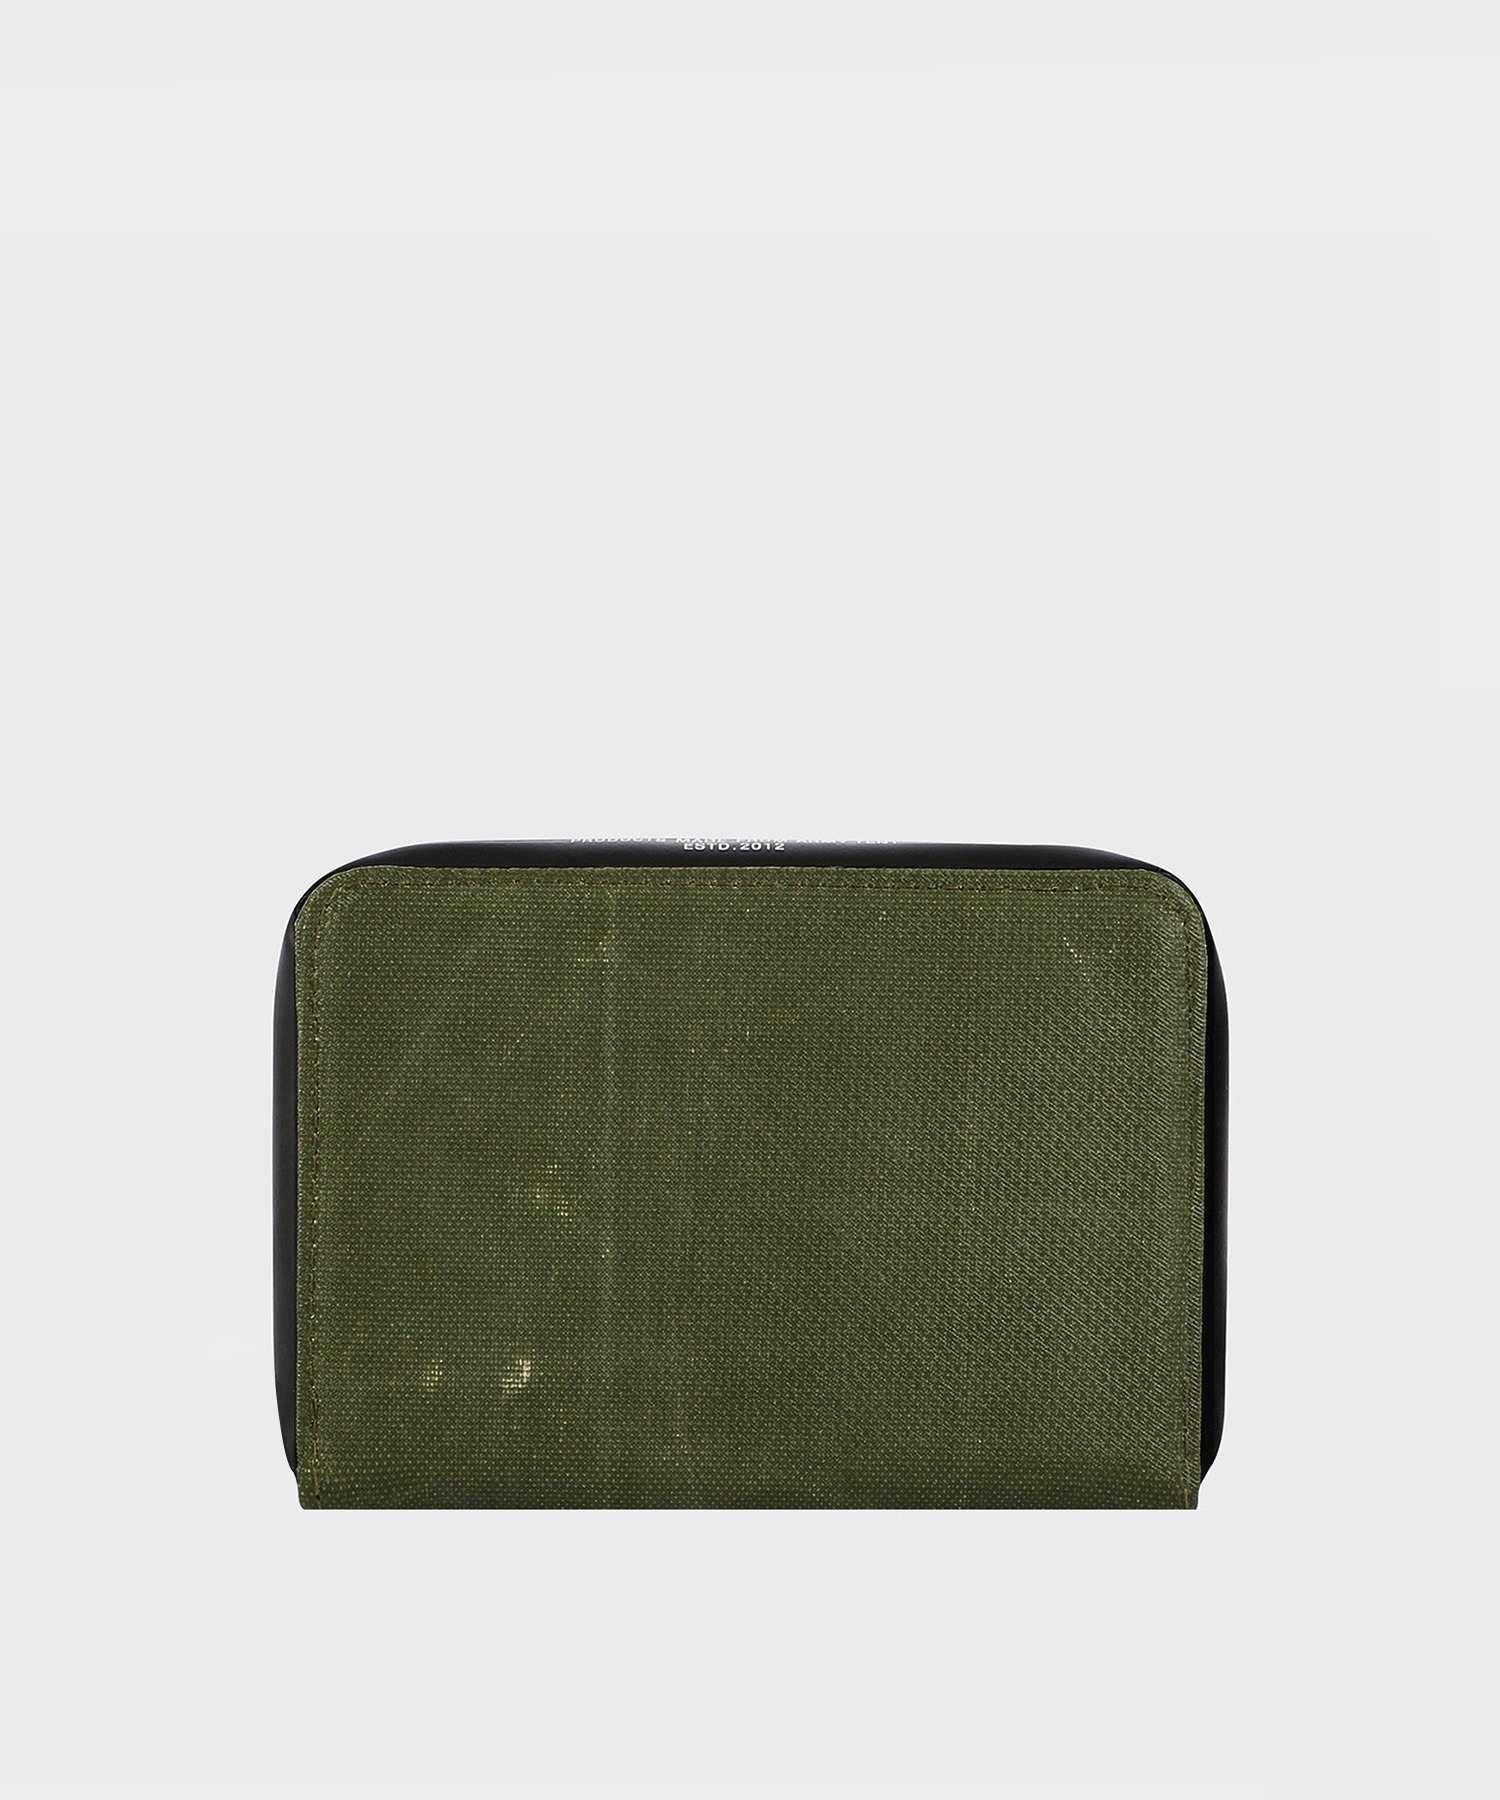 BERLIN LETTERING ZIP WALLET (OLIVE DRAB) M / UPCYCLED